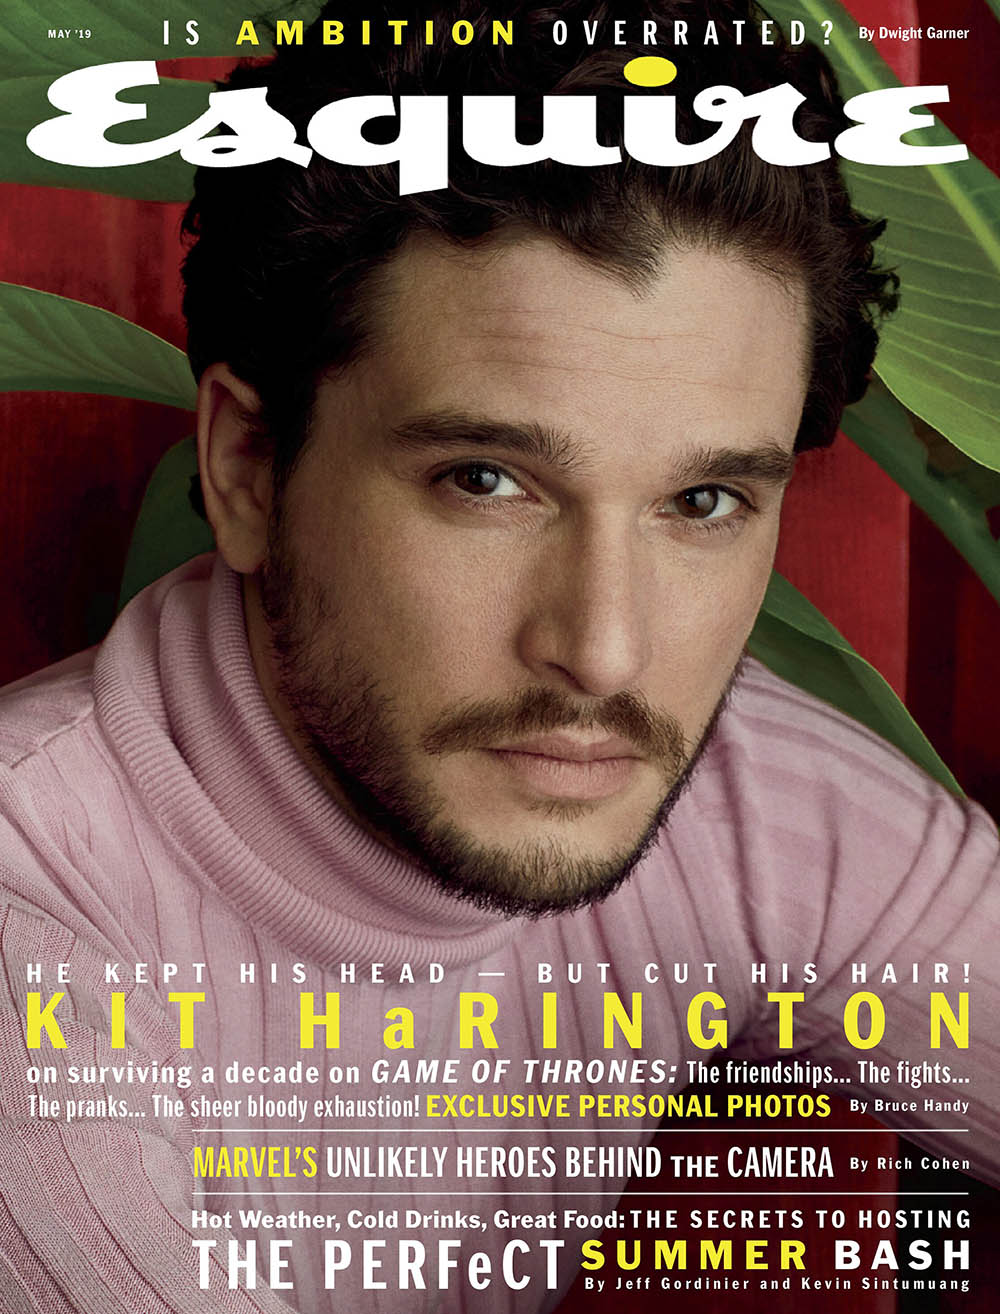 Kit Harington covers Esquire UK May 2019 by Alexi Lubomirski